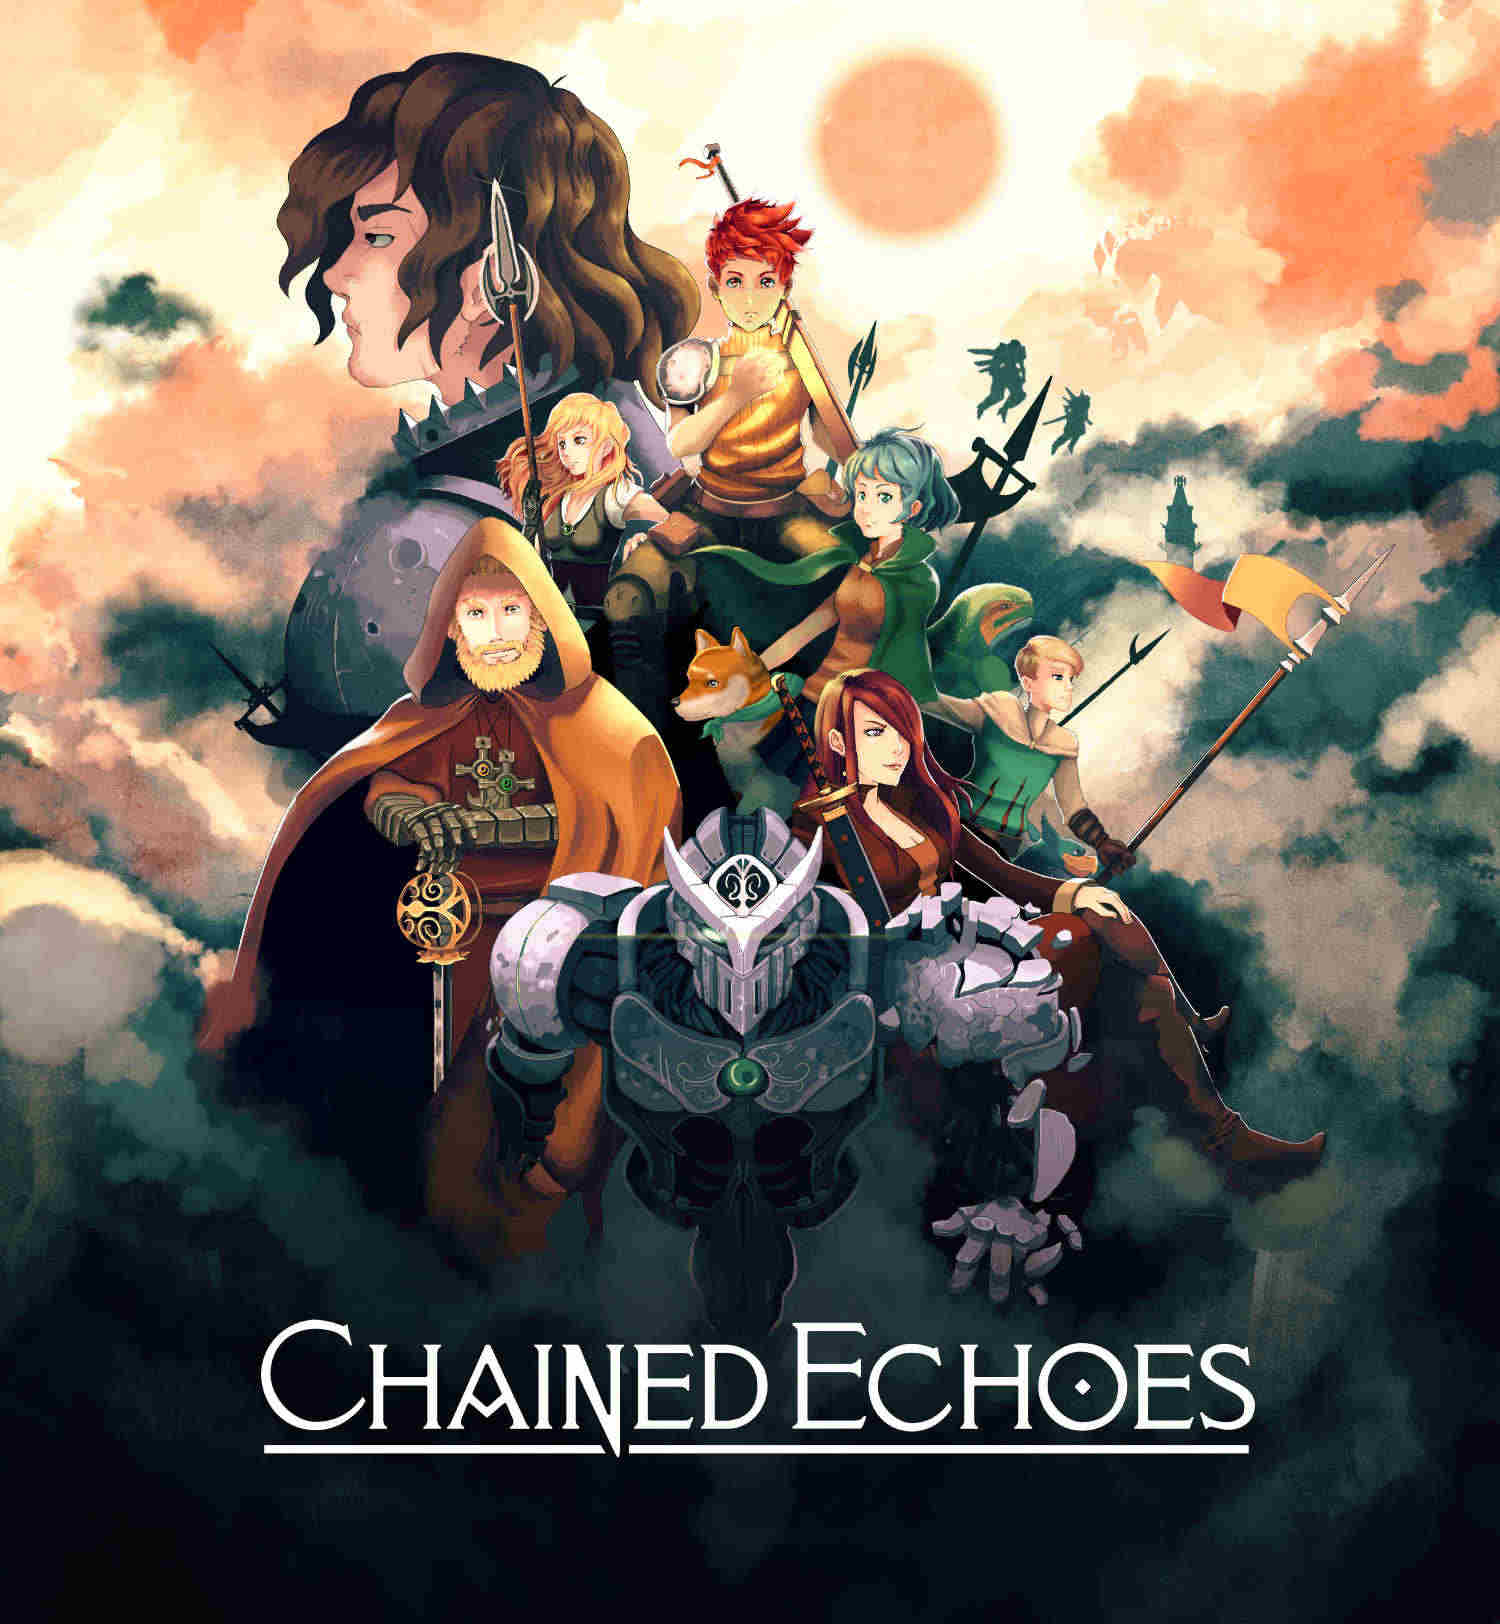 Chained Echoes - Wikipedia